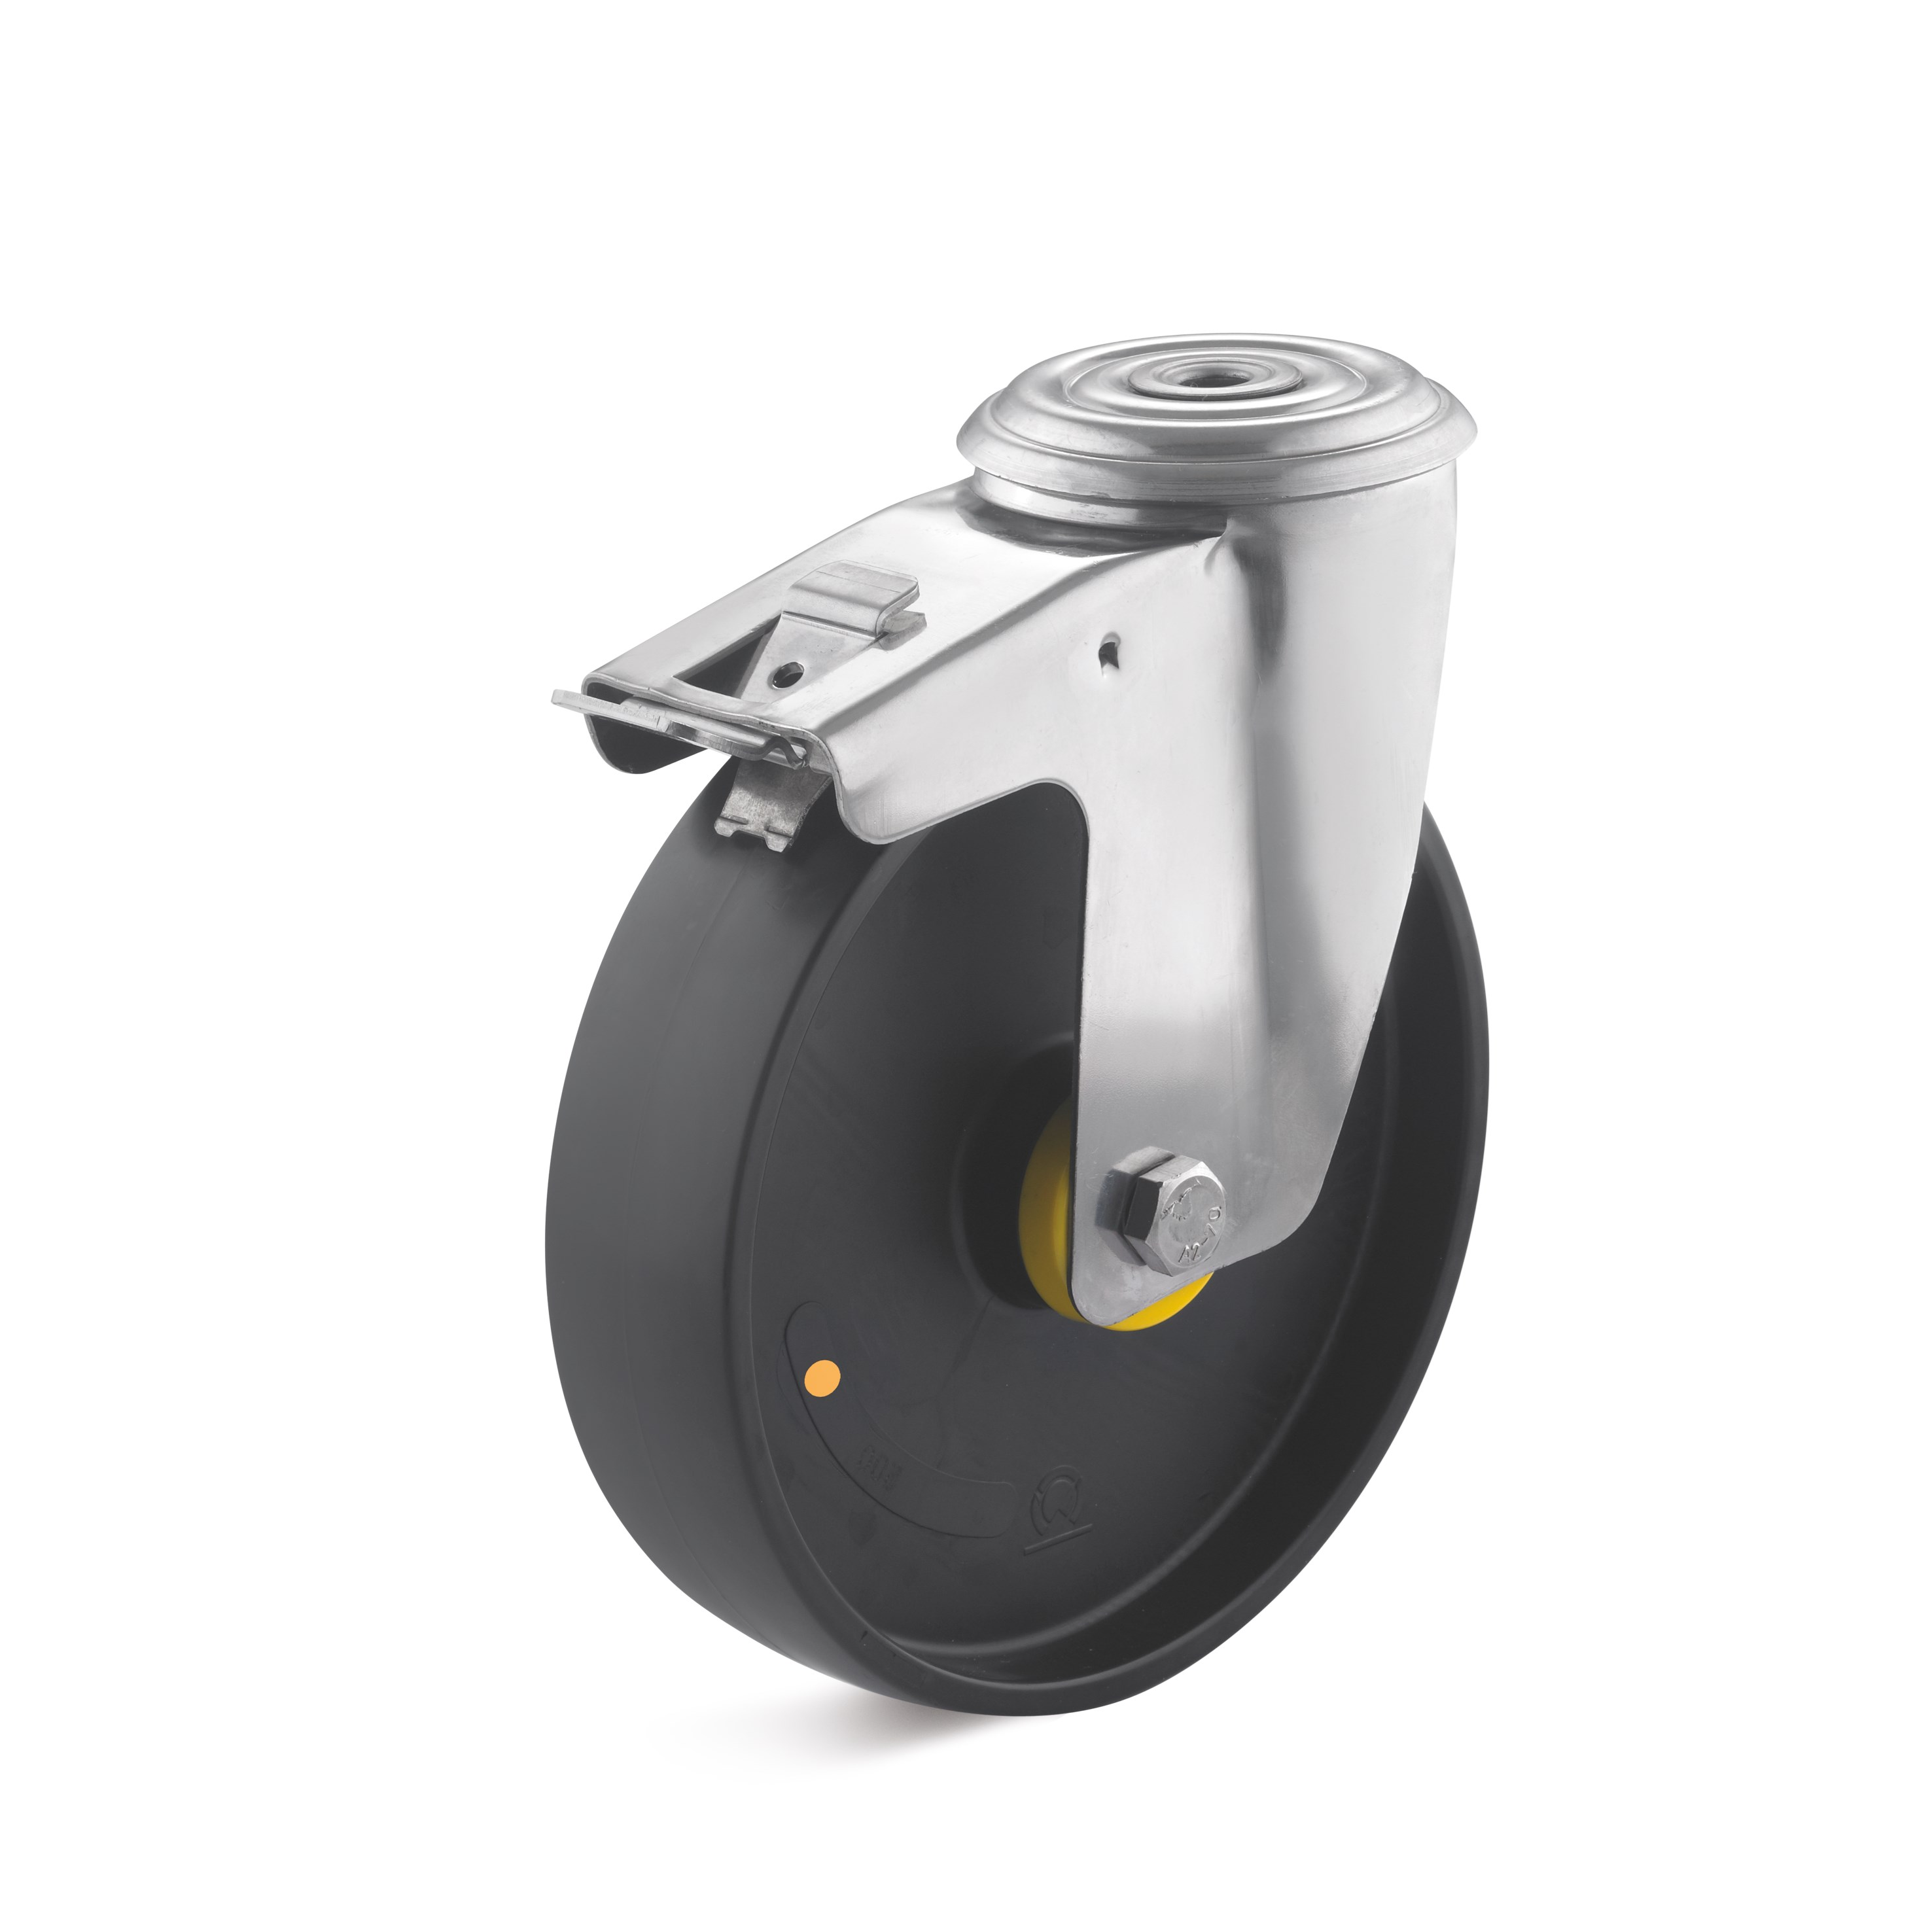 Stainless steel swivel castor with double stop and bolt hole, polyamide wheel